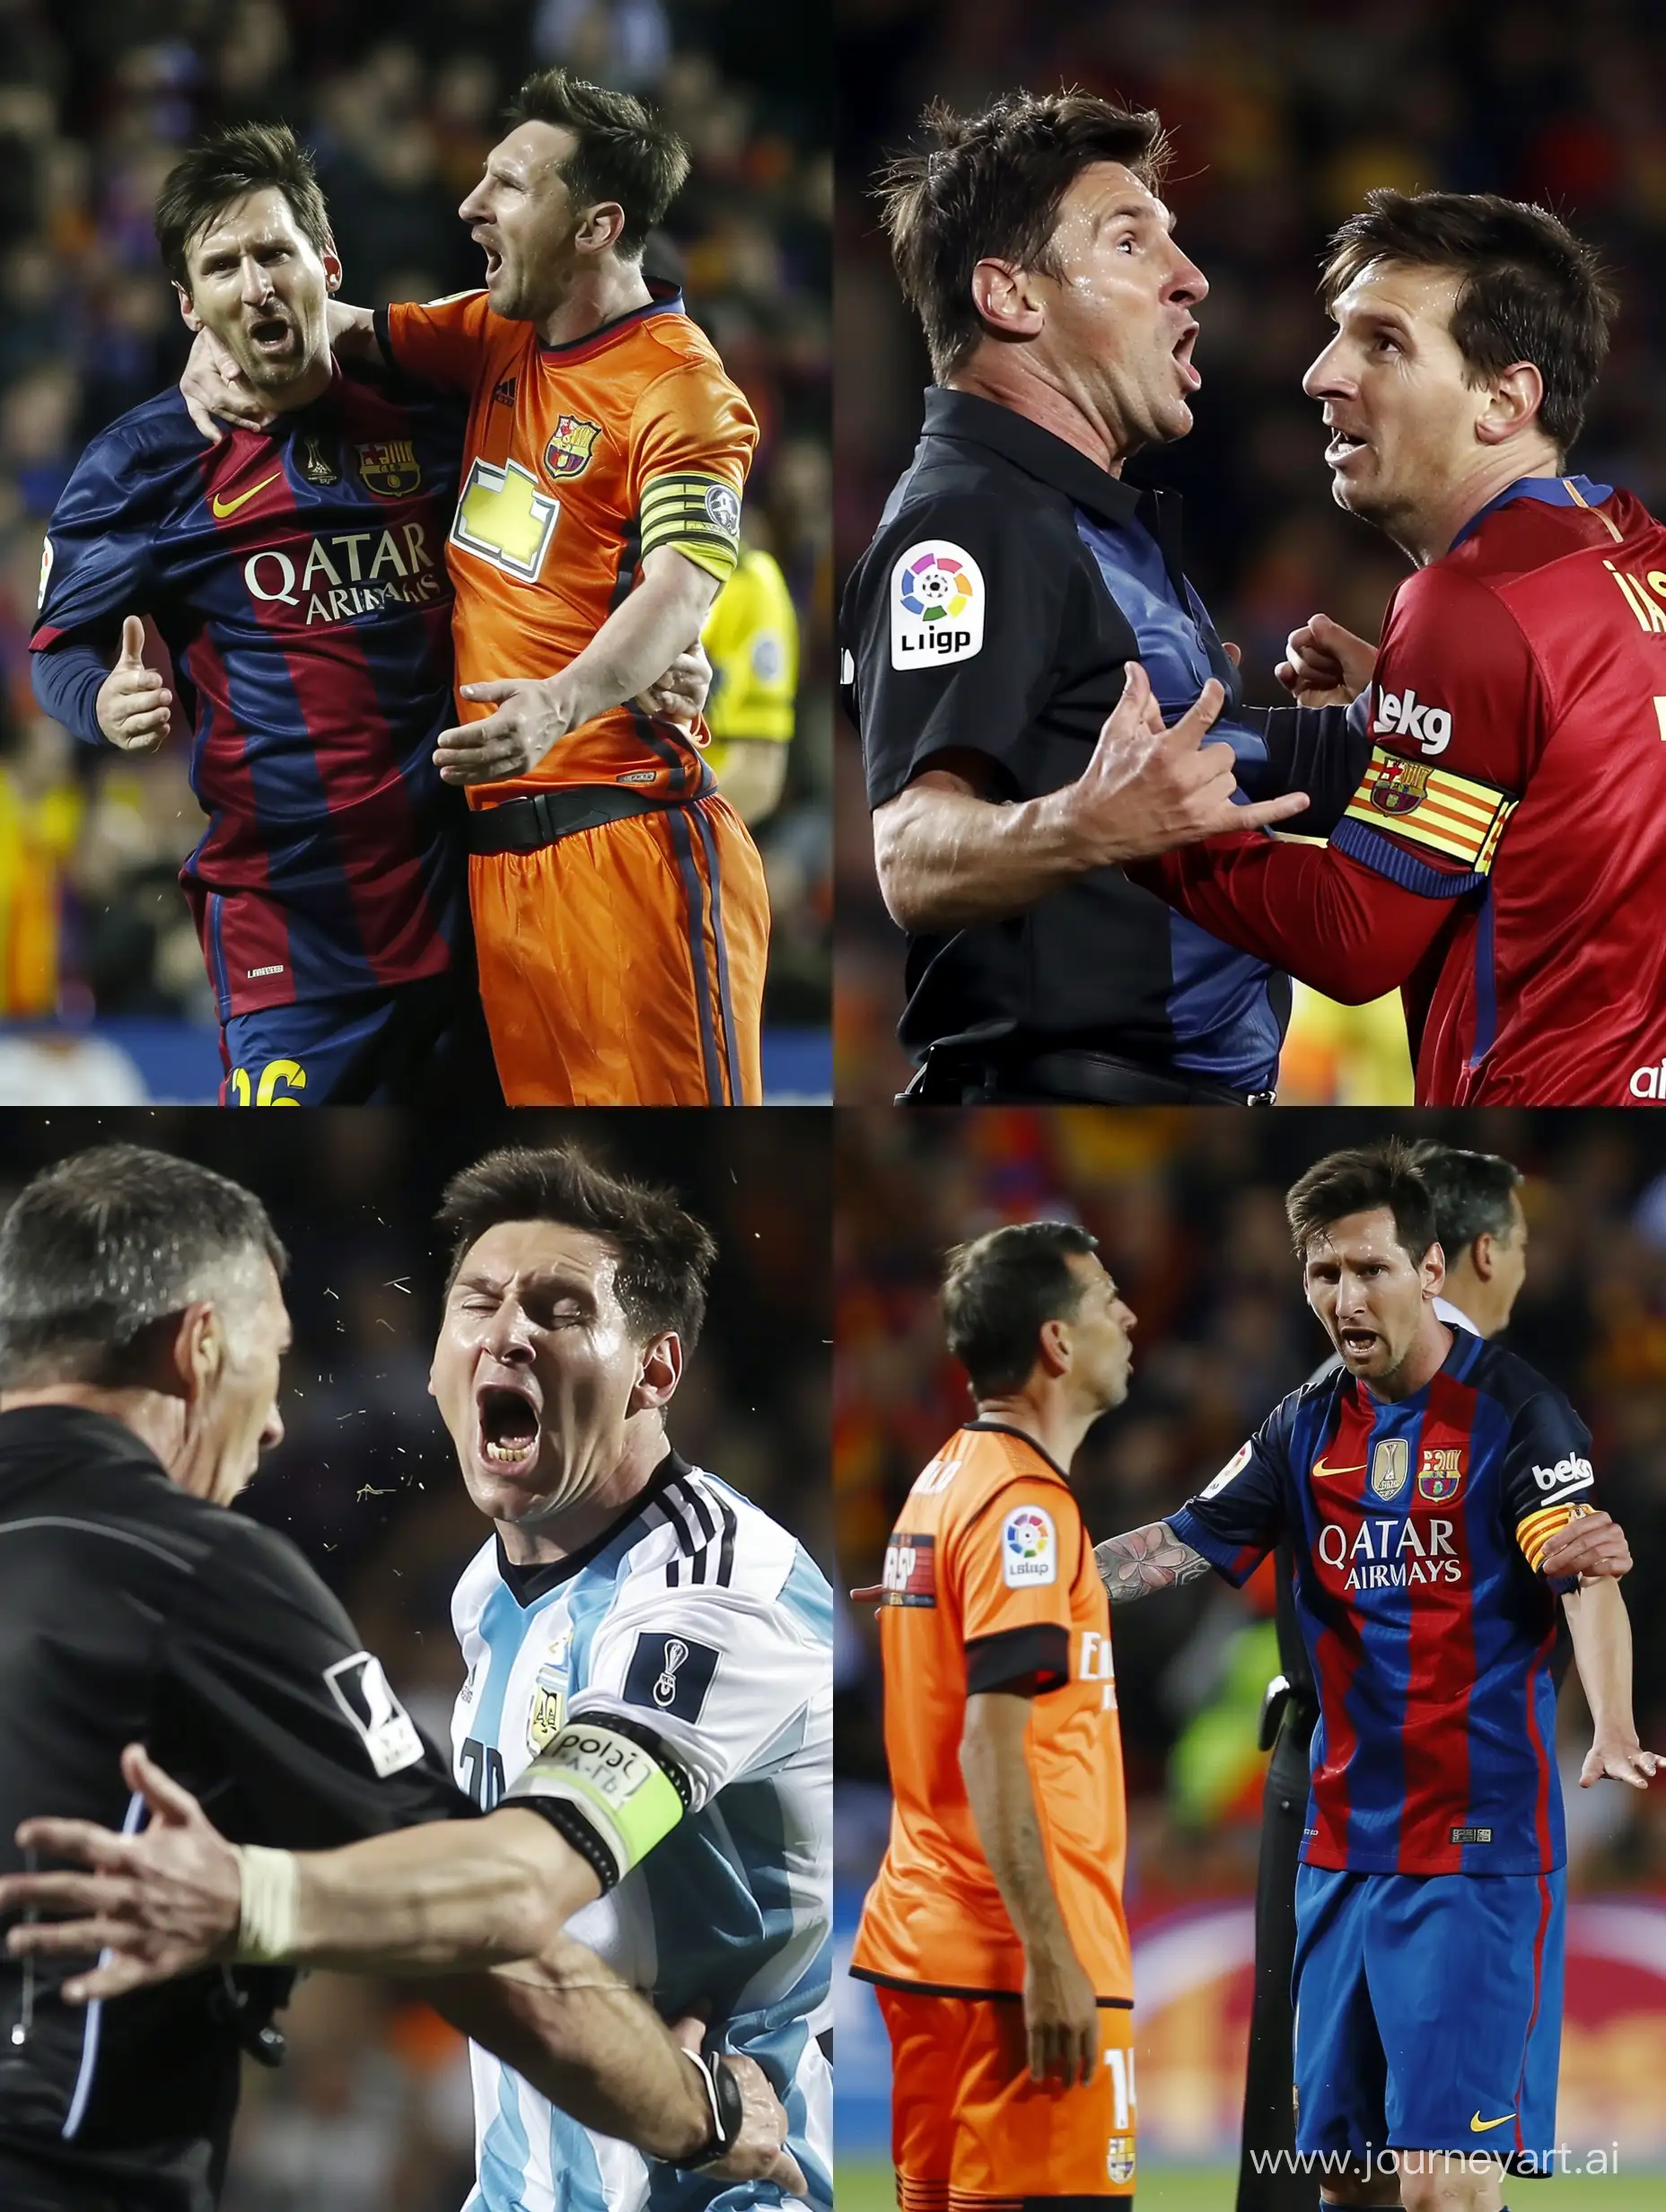 Lionel messi fighting against a referee in a match because he didn’t give him a penalty